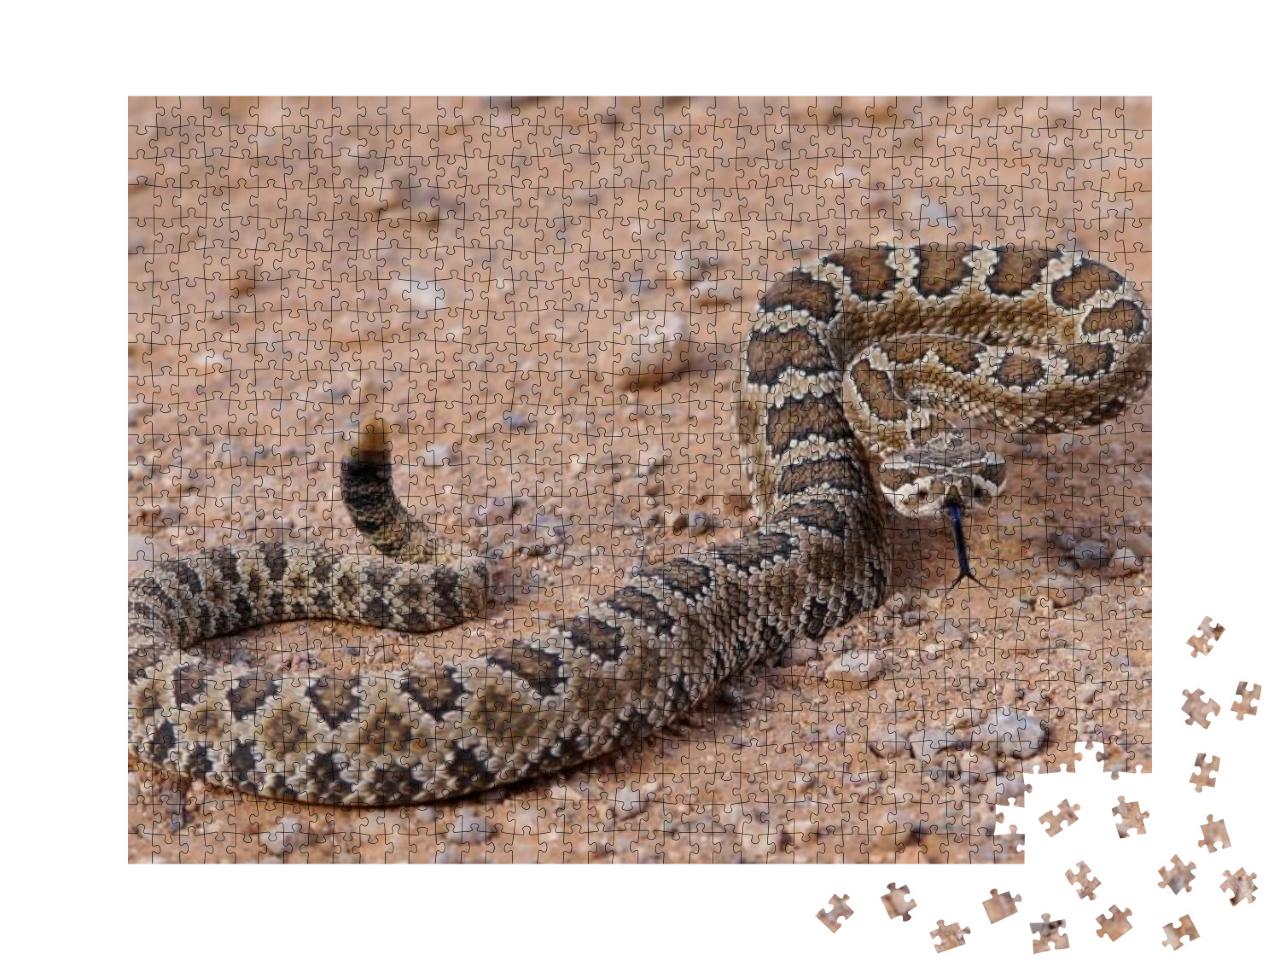 Dangerous Rattle Snake, Coiled & Ready to Strike - Great... Jigsaw Puzzle with 1000 pieces